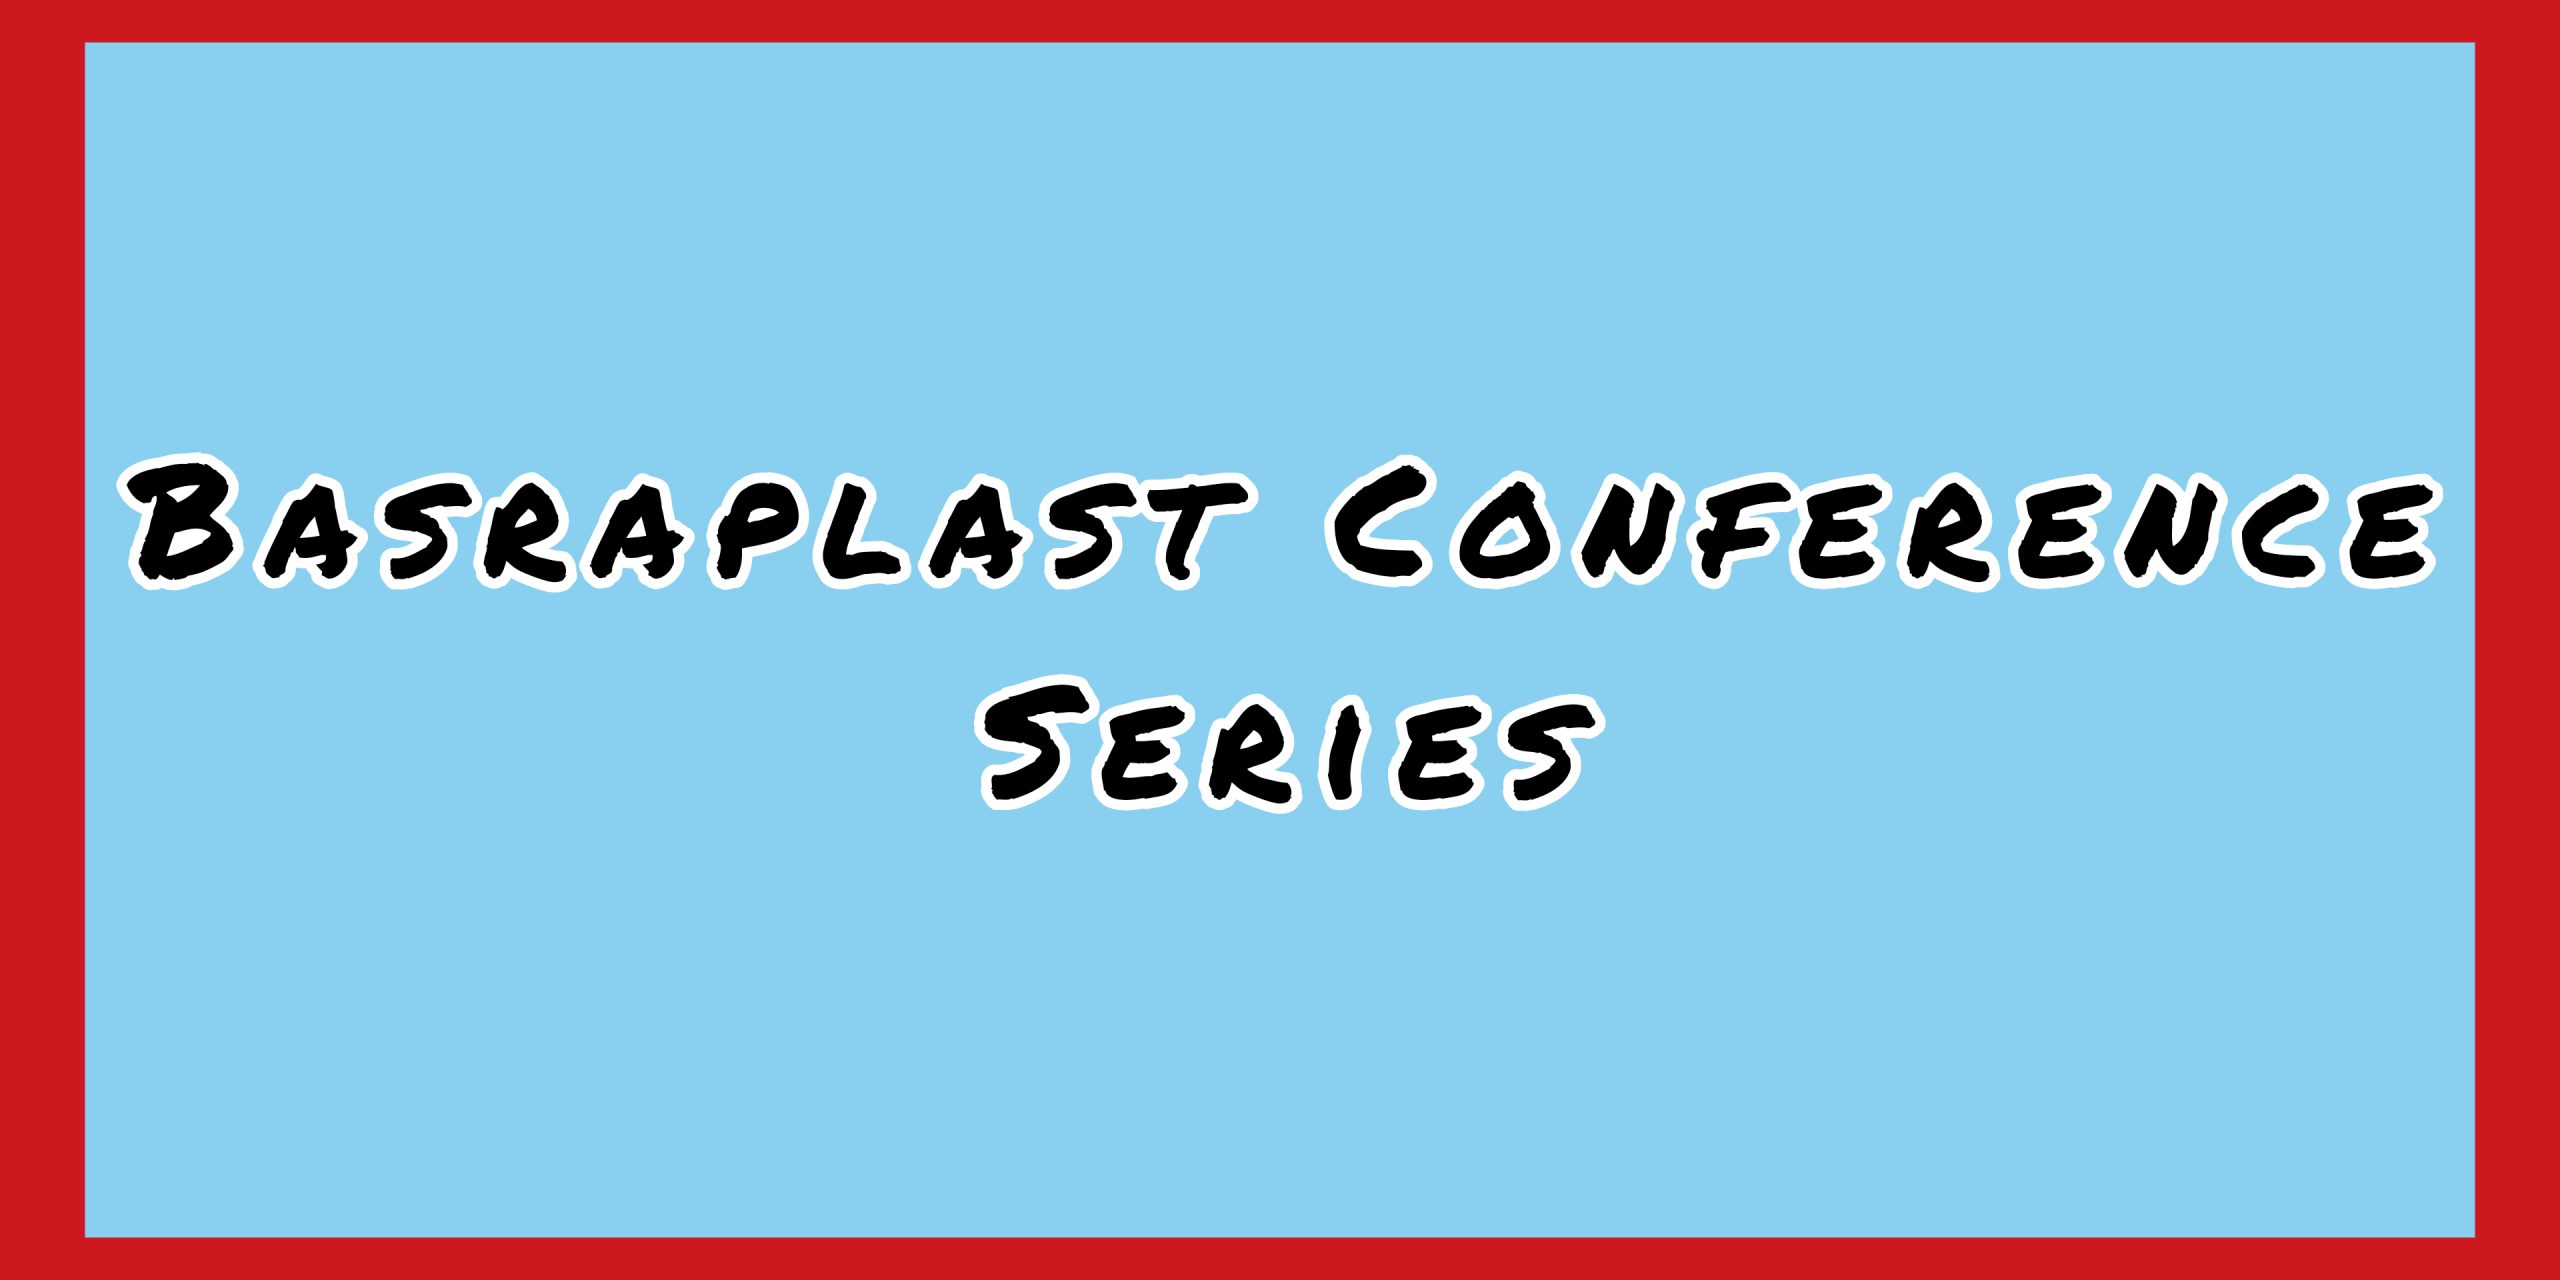 Basraplast Conference Series